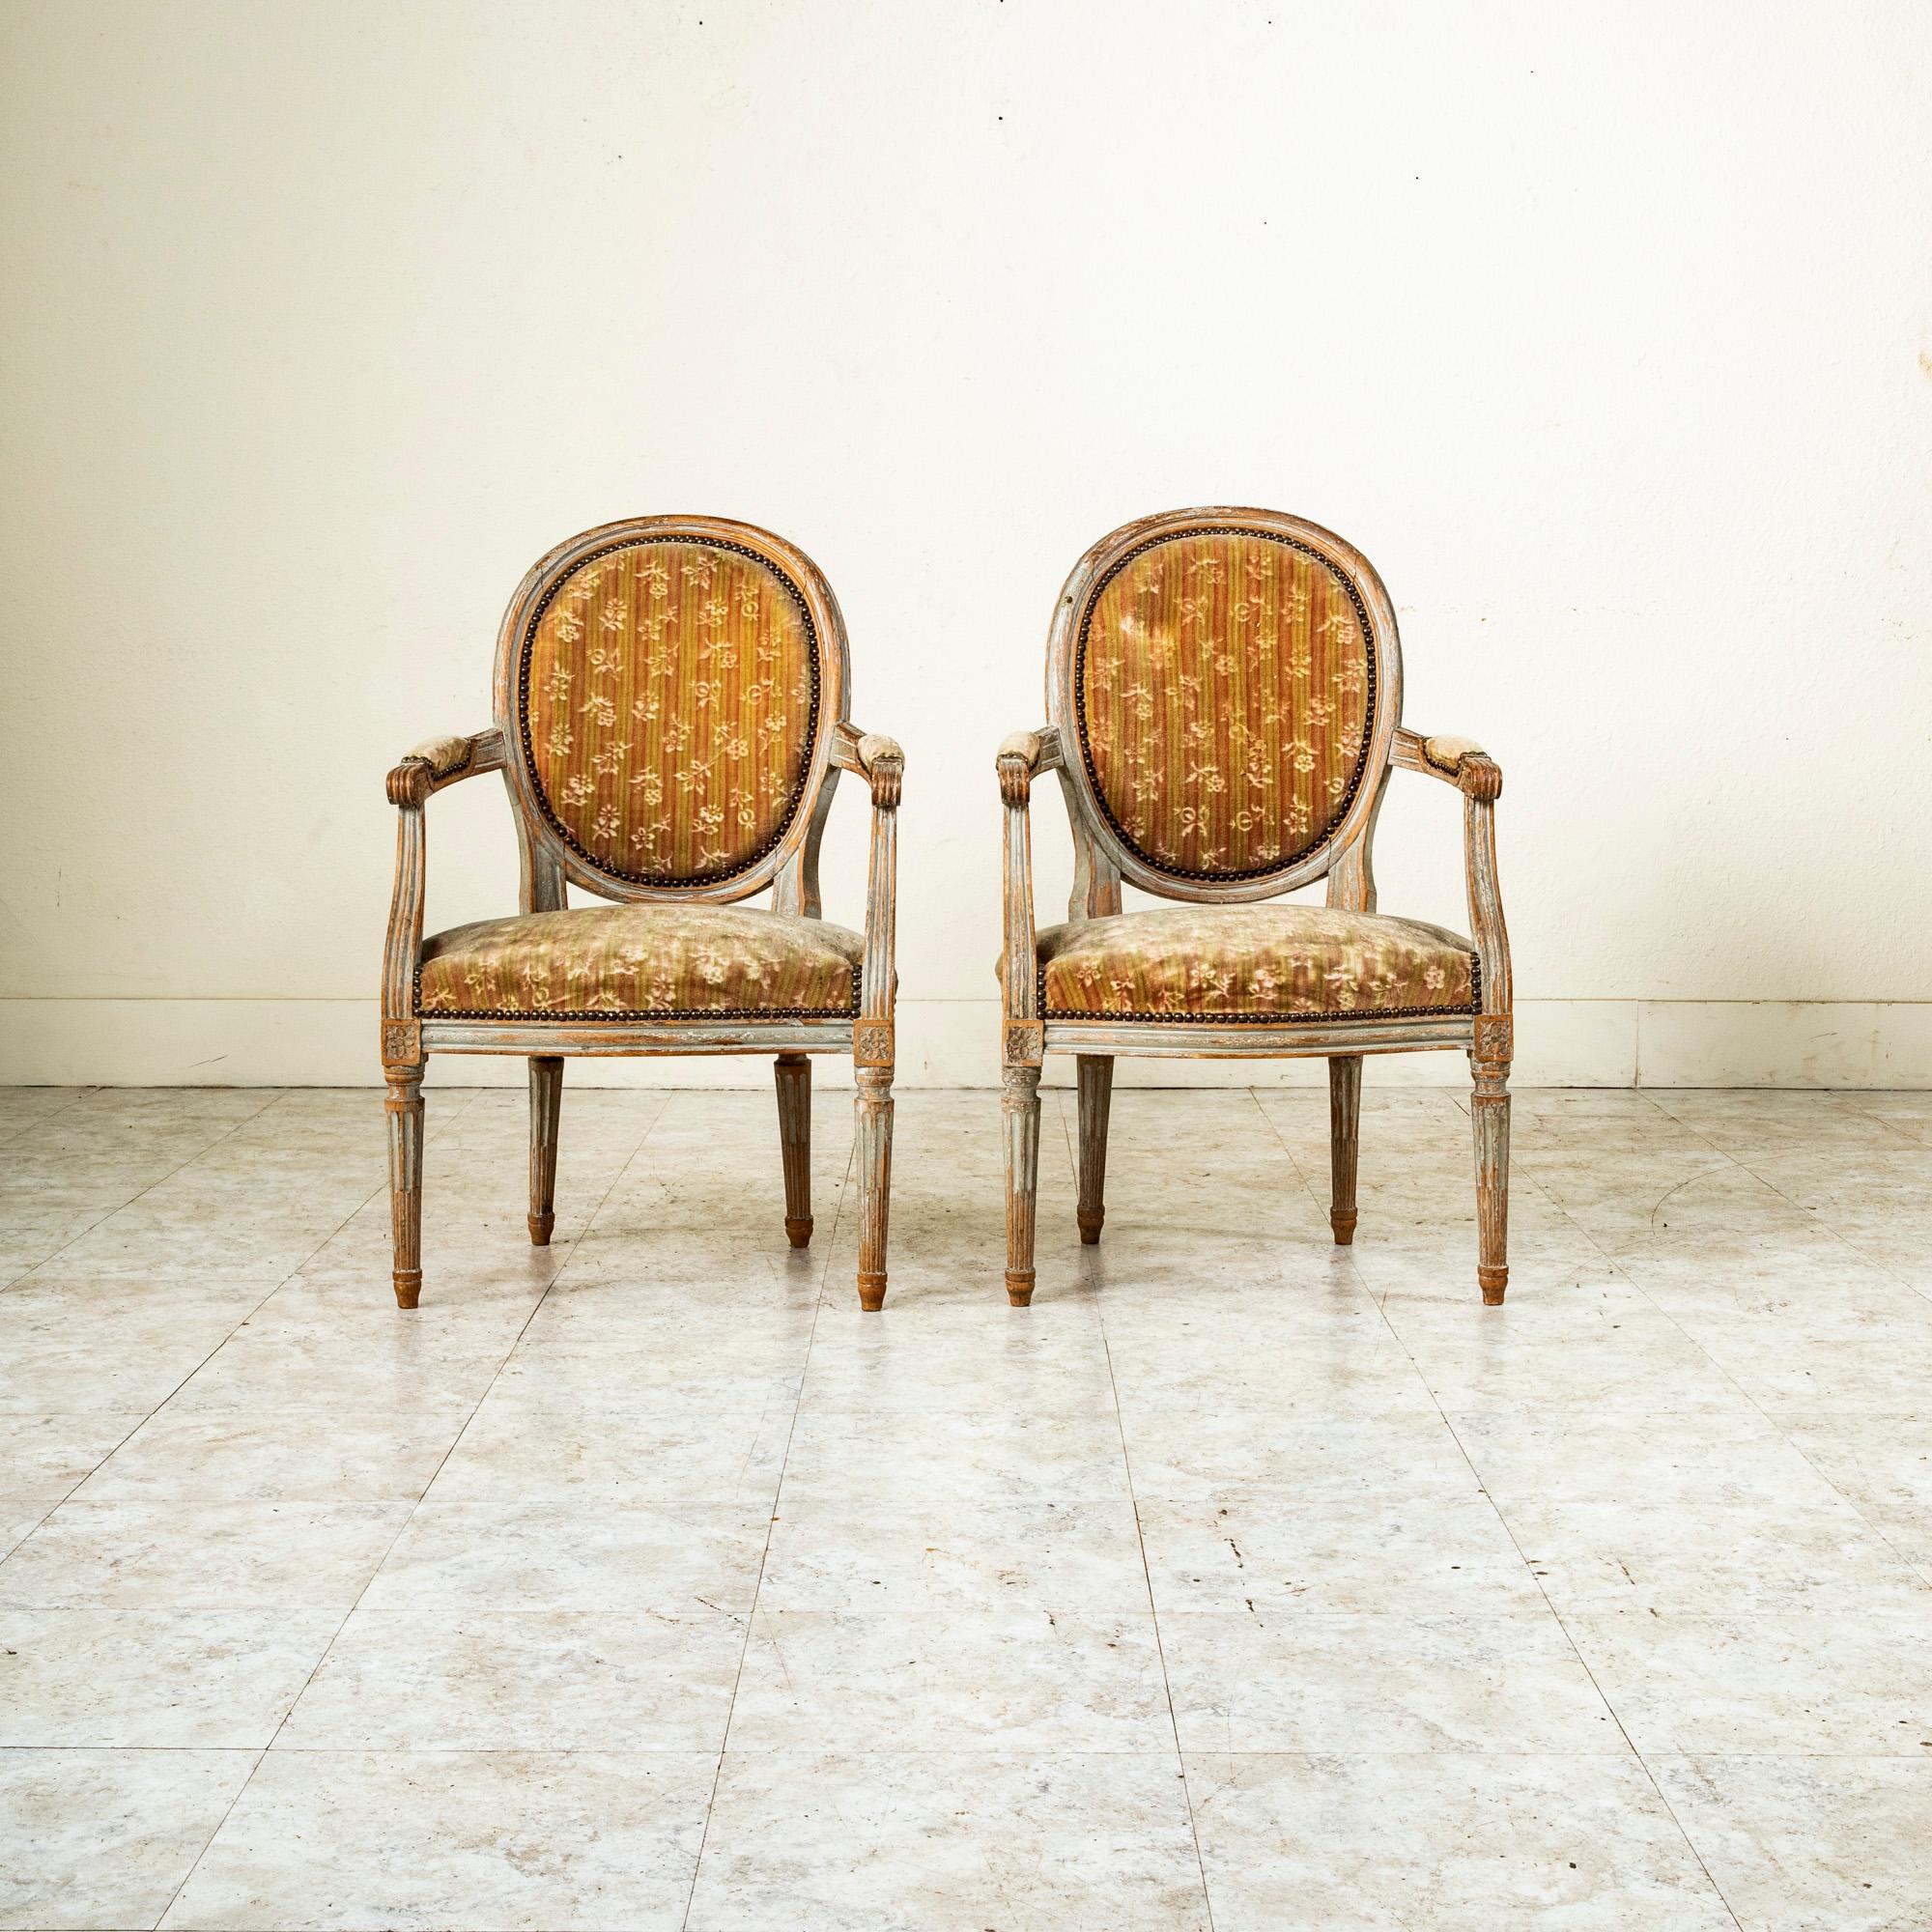 This pair of late eighteenth century French Louis XVI period armchairs features its original paint worn to a beautiful patina that only comes with age. This classic pair features medallion backs, fluted arms with scrolled armrests, and tapered legs